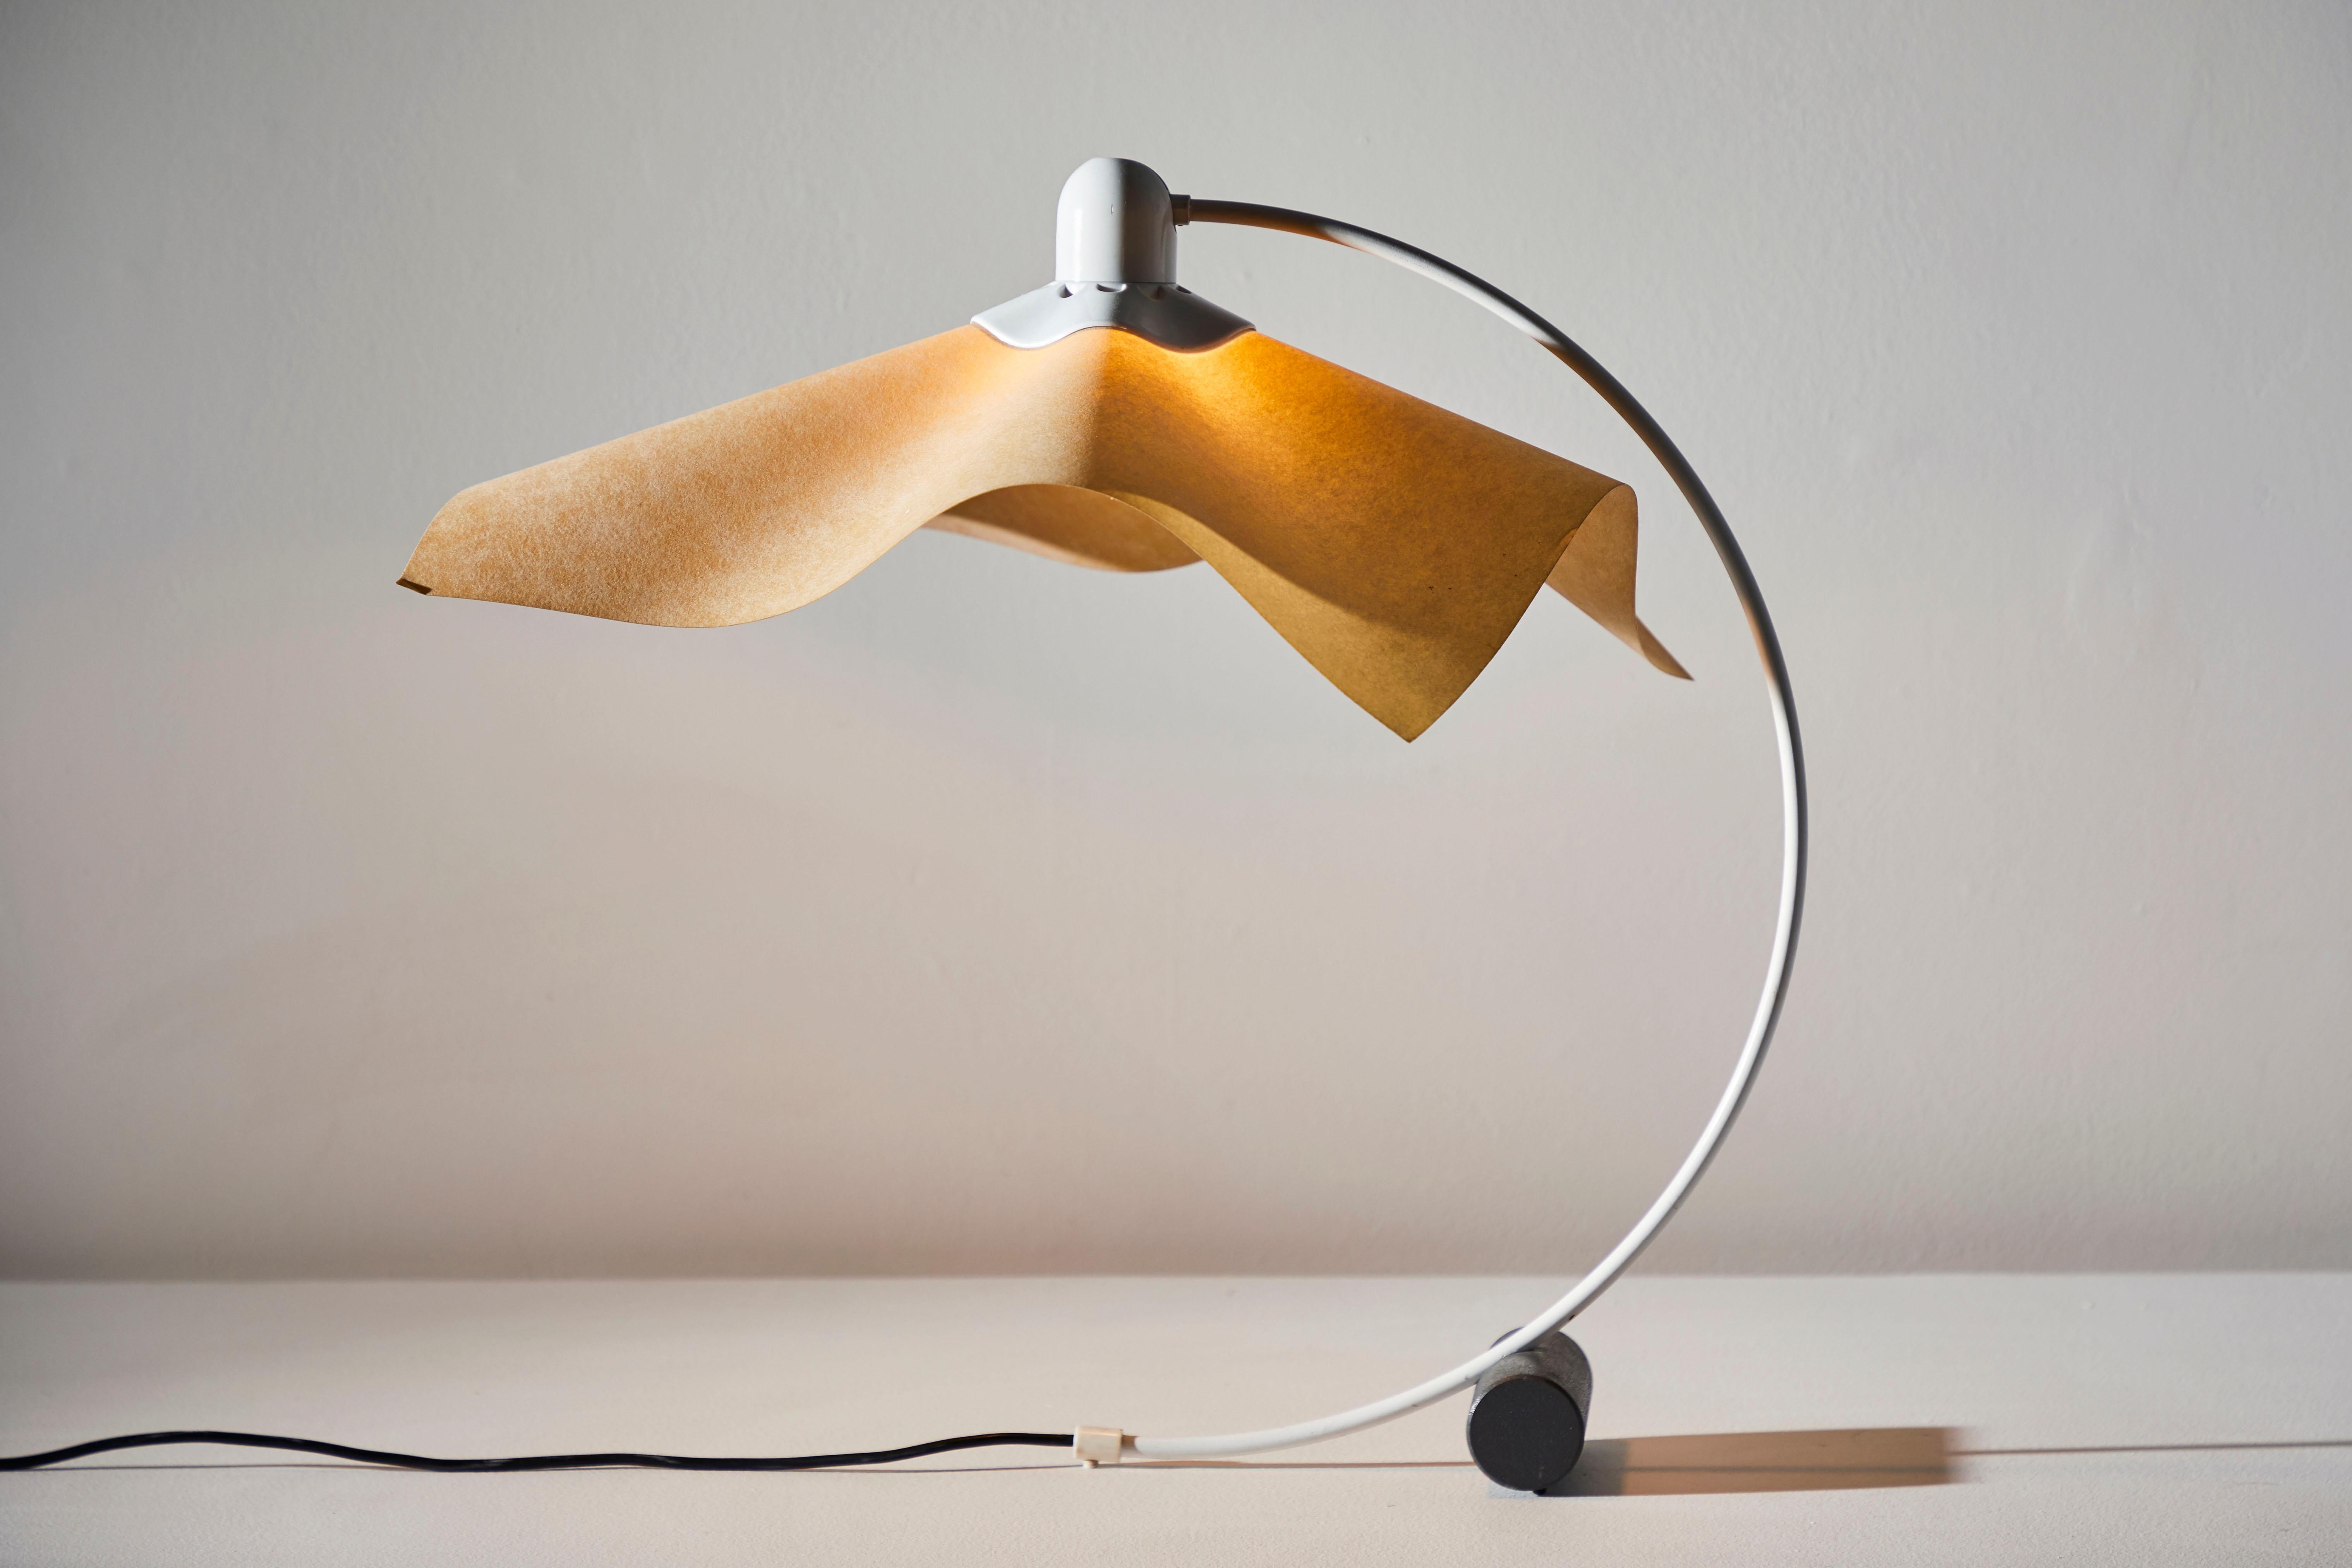 Area Curvea table lamp by Mario Bellini & Giorgio Origlia for Artemide. Designed and manufactured in Italy, circa 1974. Steel, acrylic, with resin shade. Original cord wired for U.S. sockets. Takes one E27 60W maximum bulb.